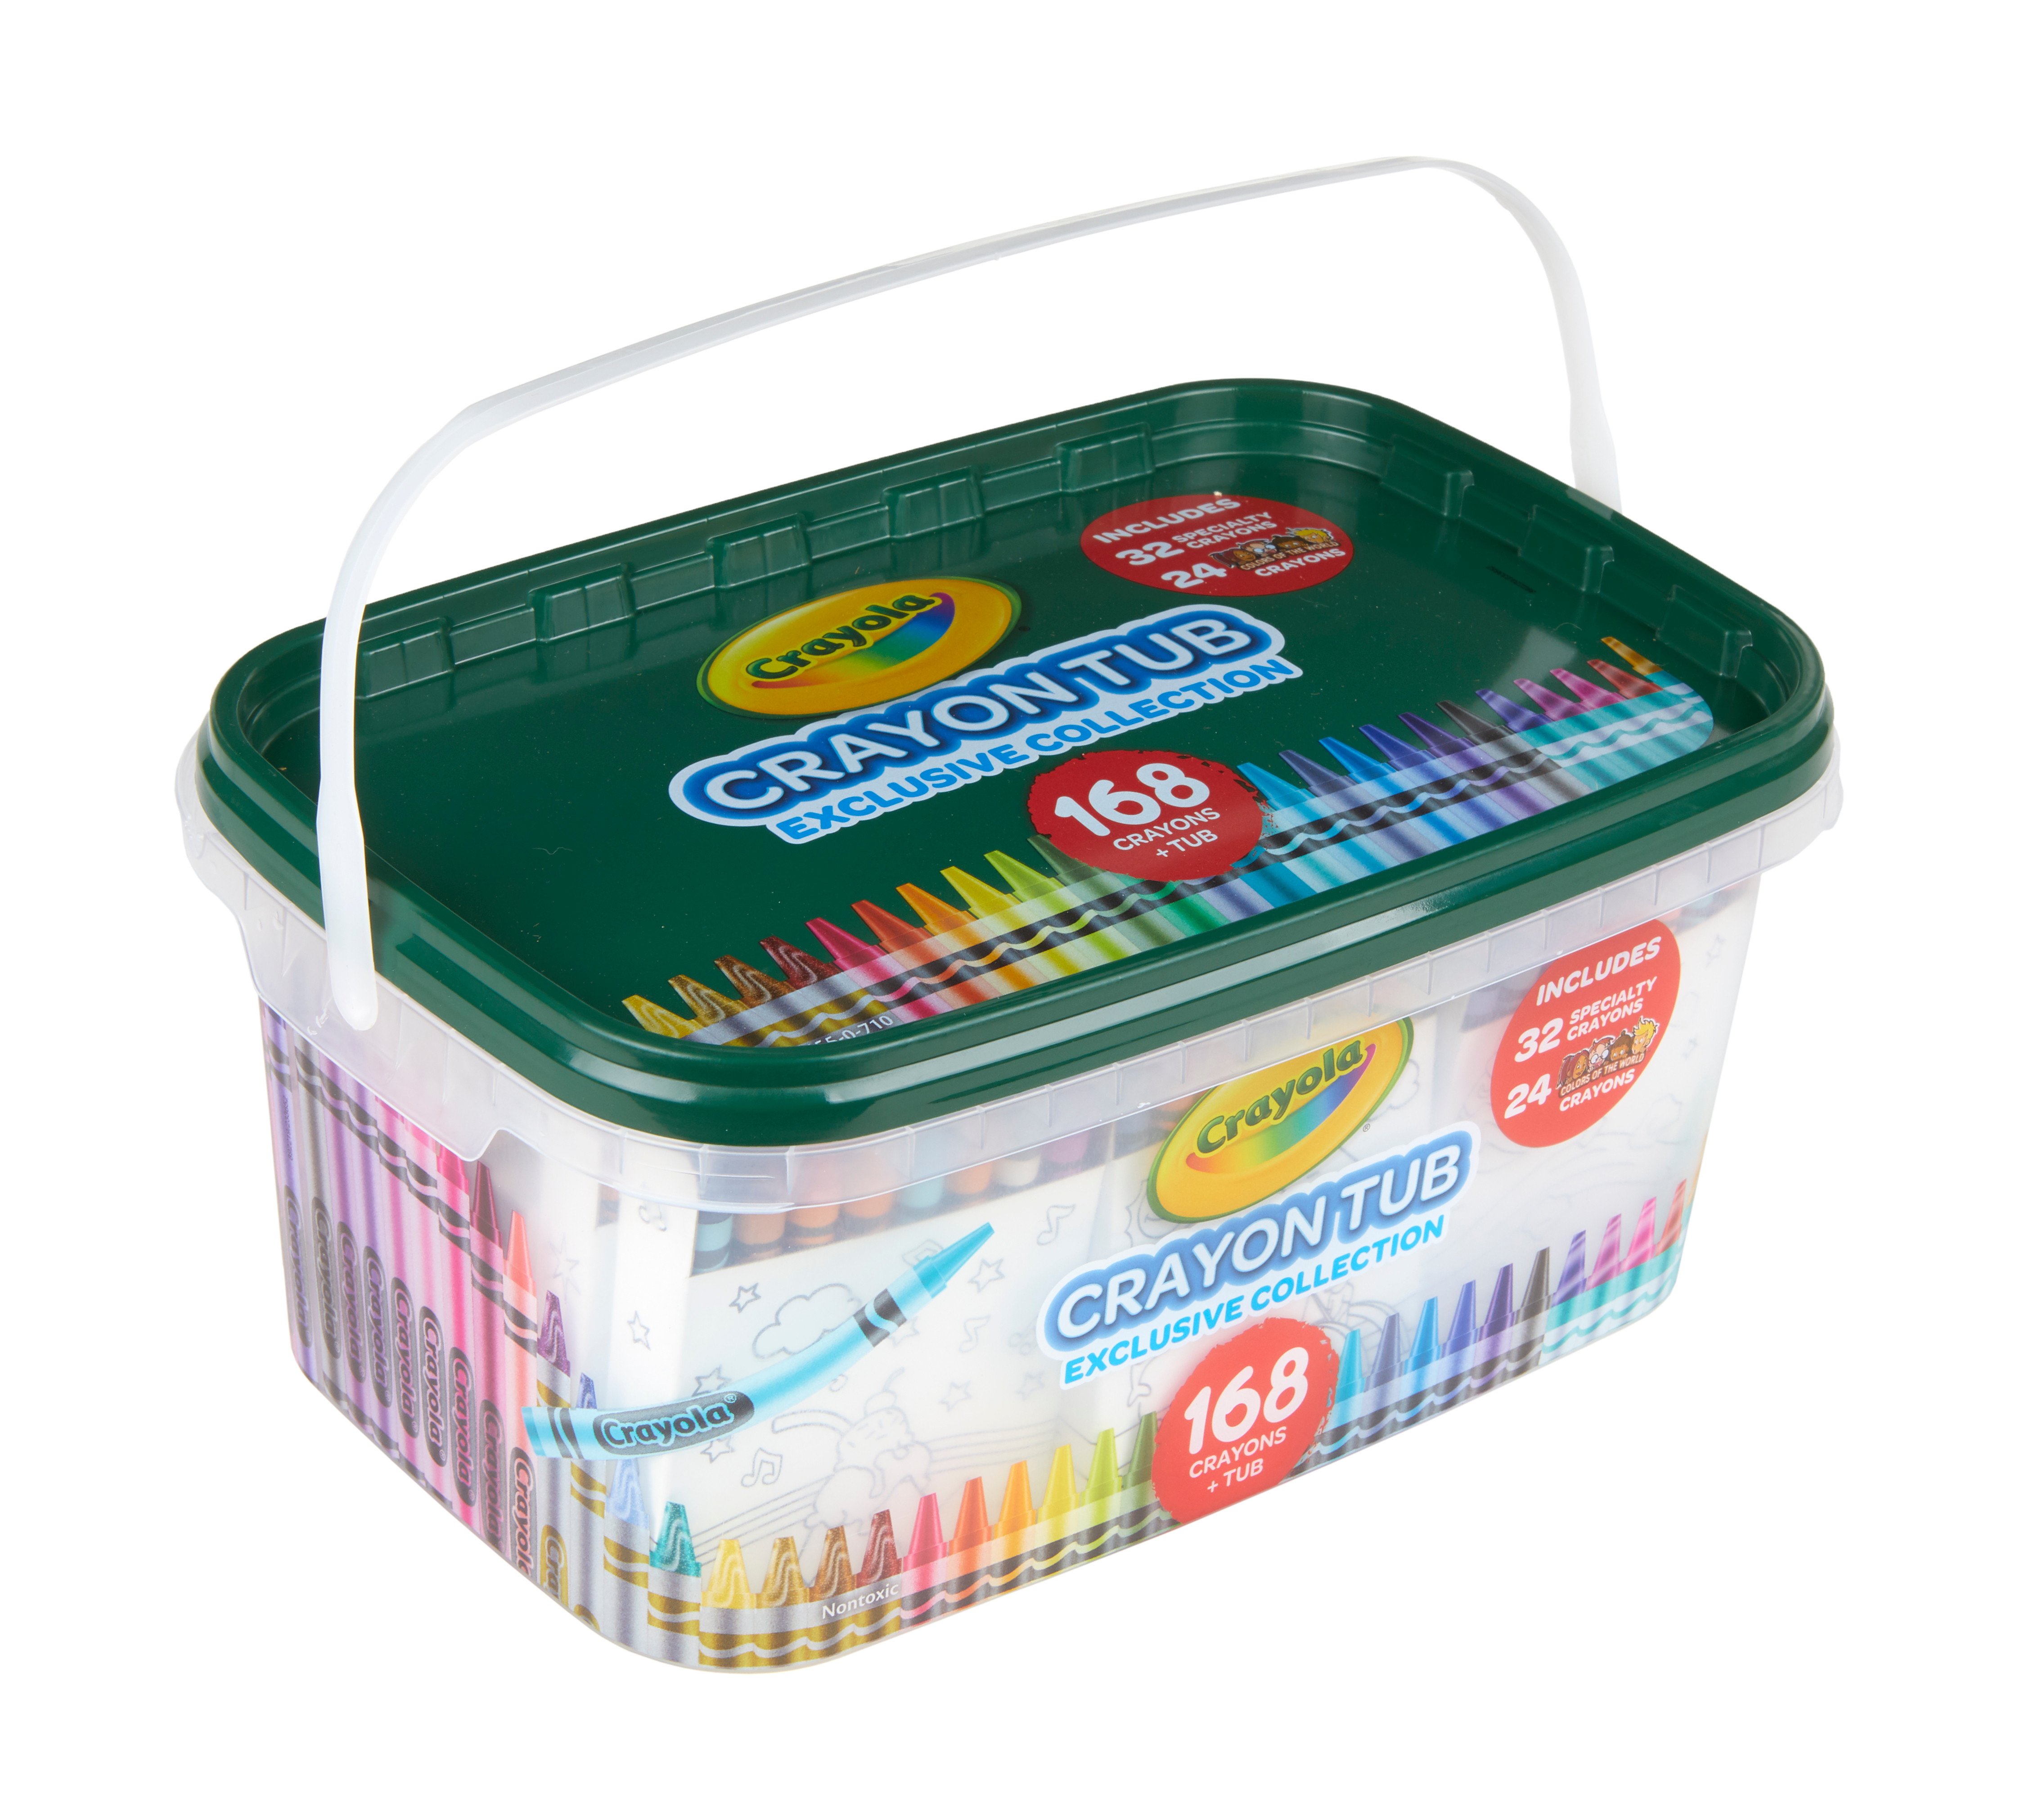 Crayola Crayon & Storage Tub, School Supplies, 168 Ct, with Colors of the World Crayons, Holiday Gift for Kids - image 5 of 9